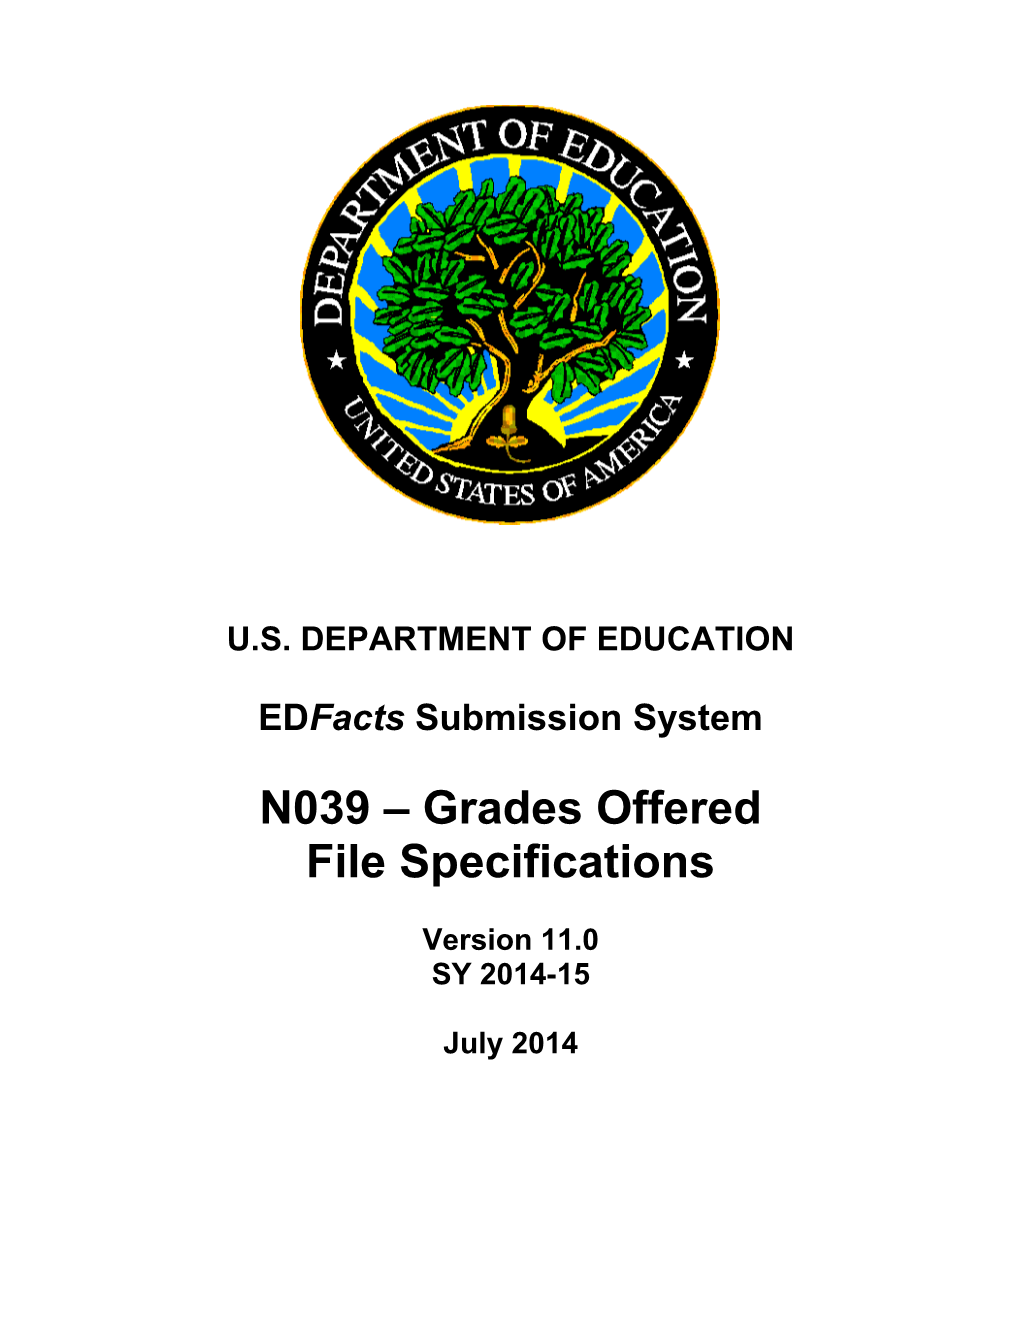 Grades Offered File Specifications